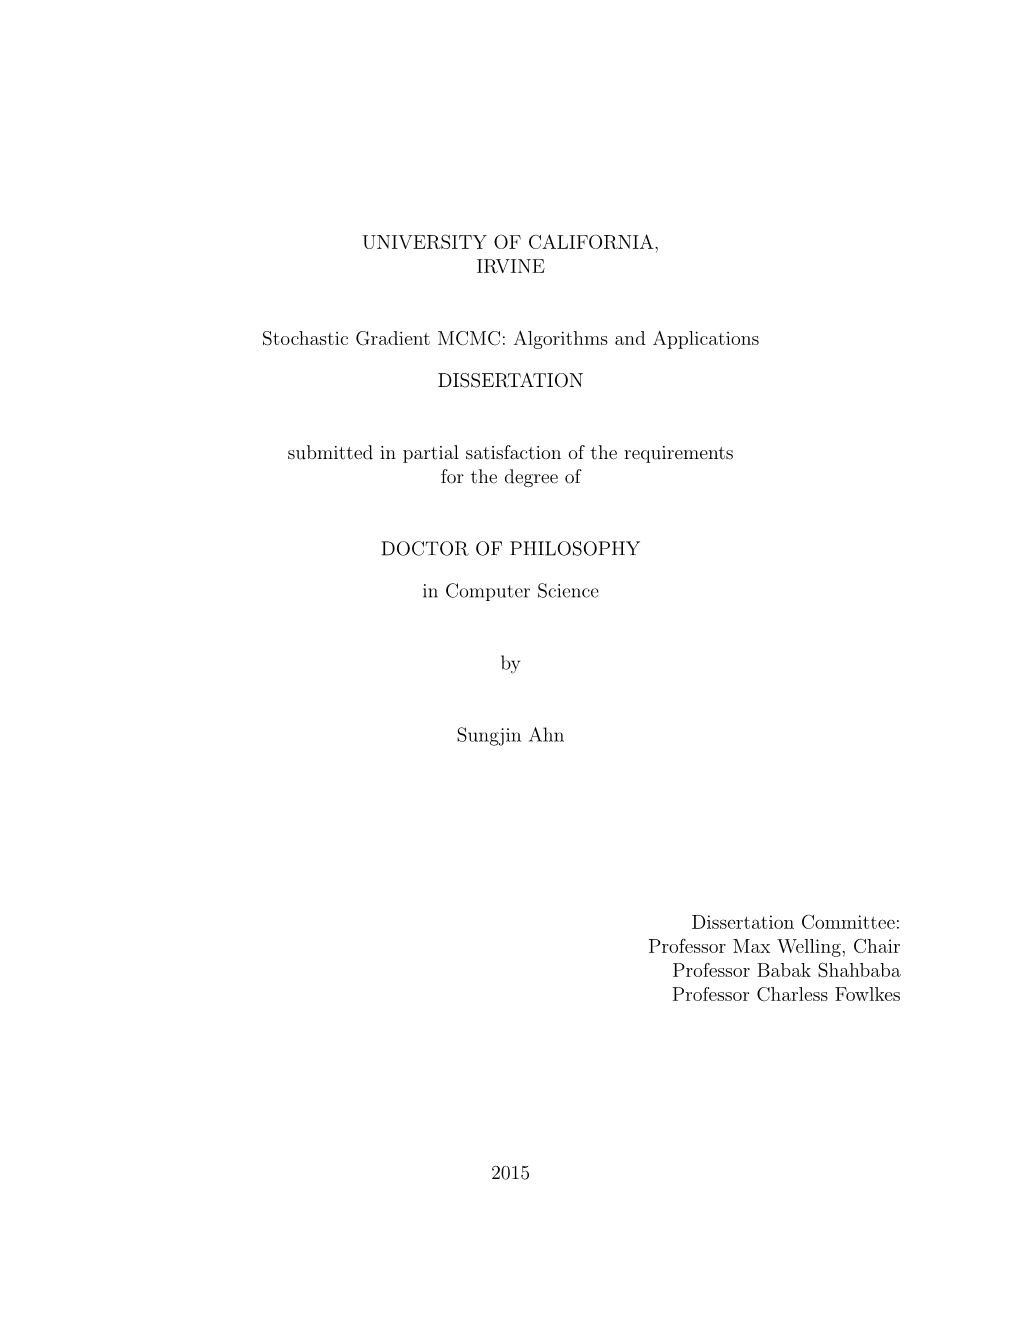 Stochastic Gradient MCMC: Algorithms and Applications